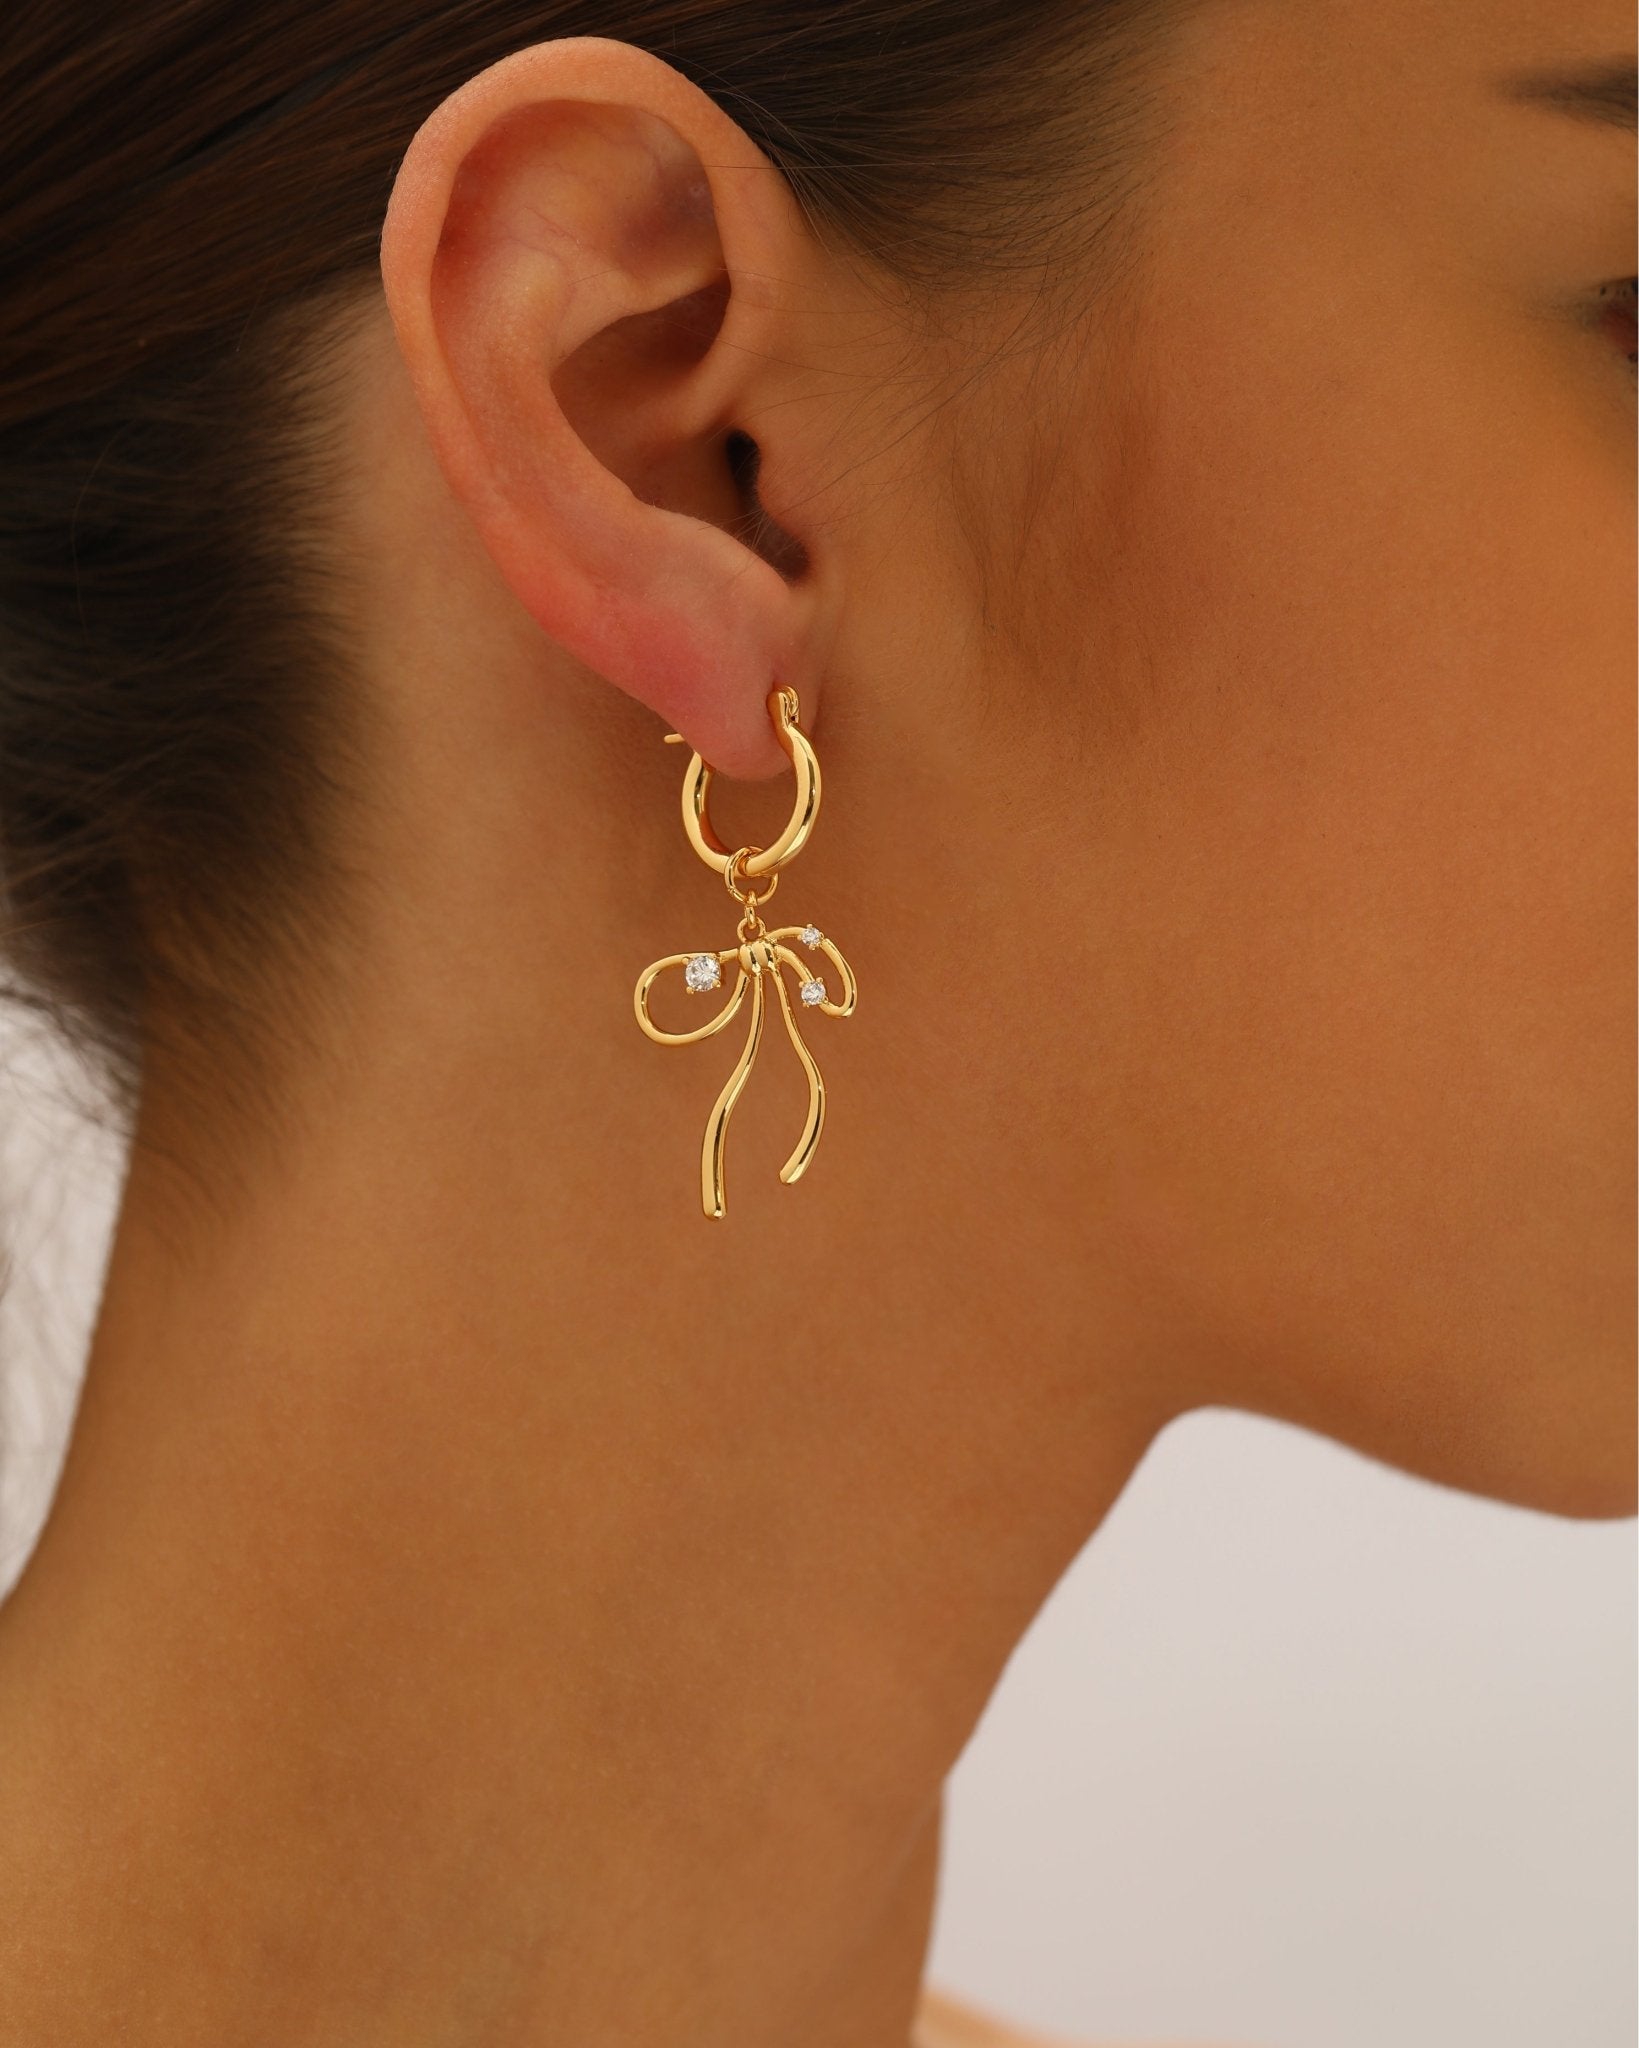 The Miffy Earrings in Gold